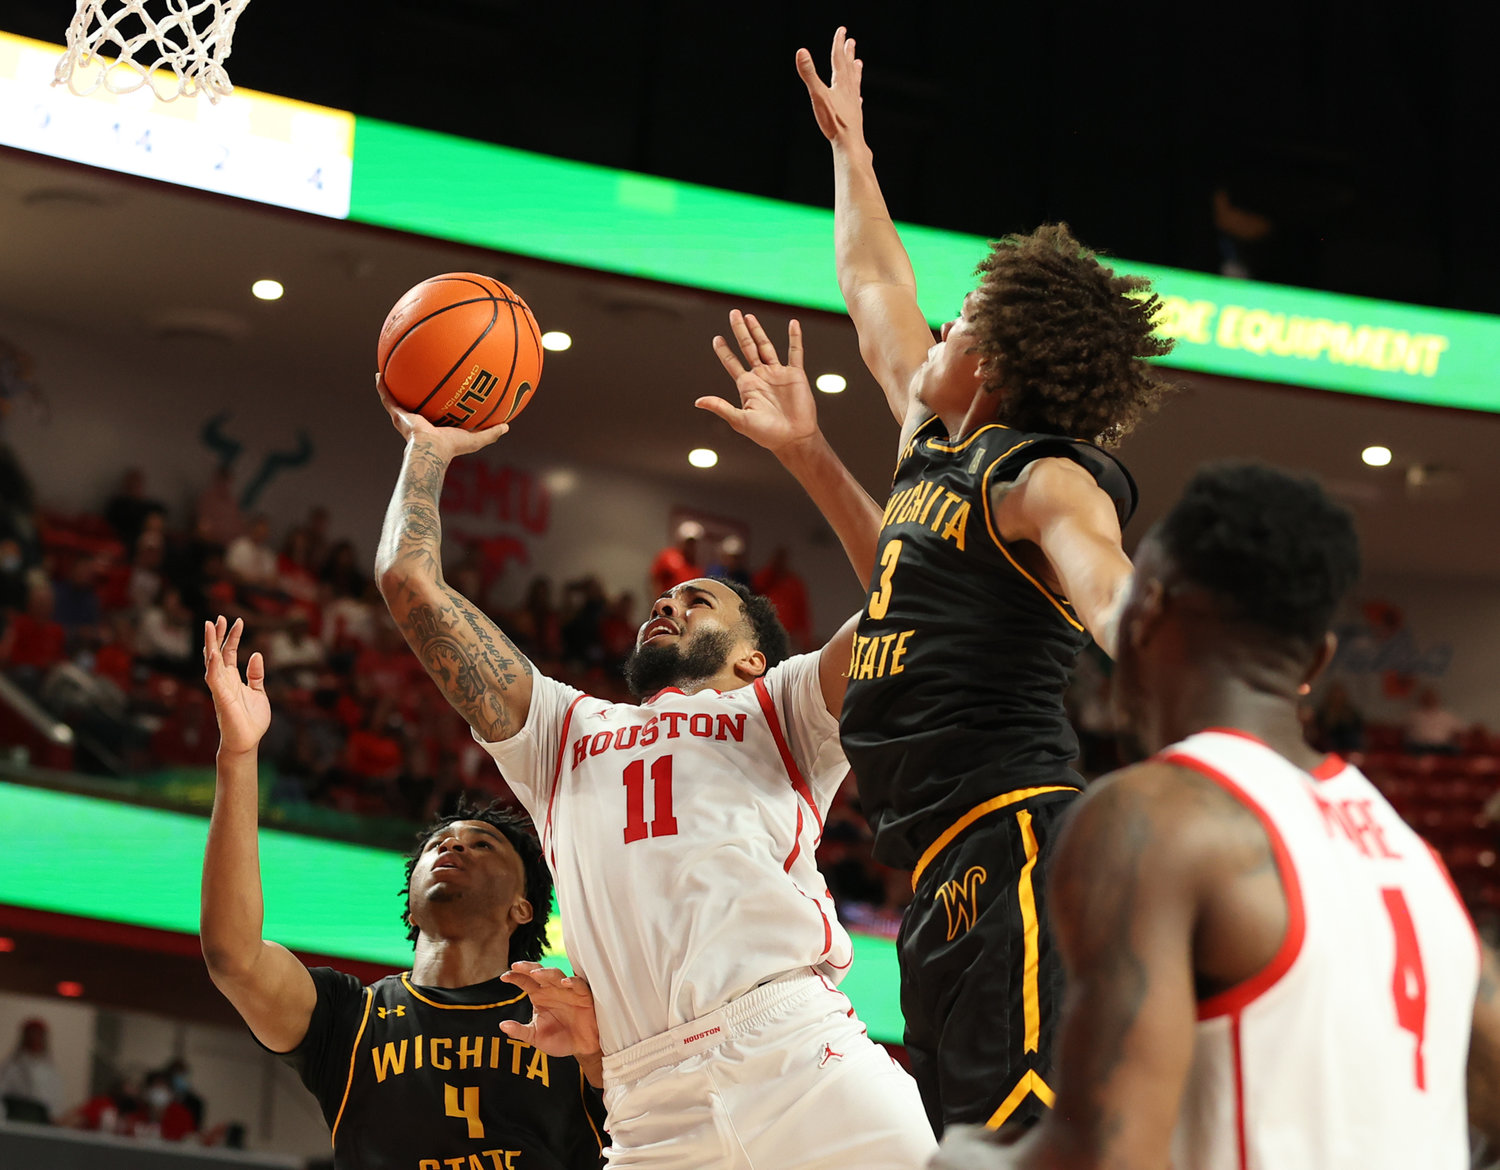 Houston Cougars guard Kyler Edwards (11) goes to the basket during an NCAA men’s basketball game between Houston and Wichita State on Jan. 8, 2022 in Houston, Texas.